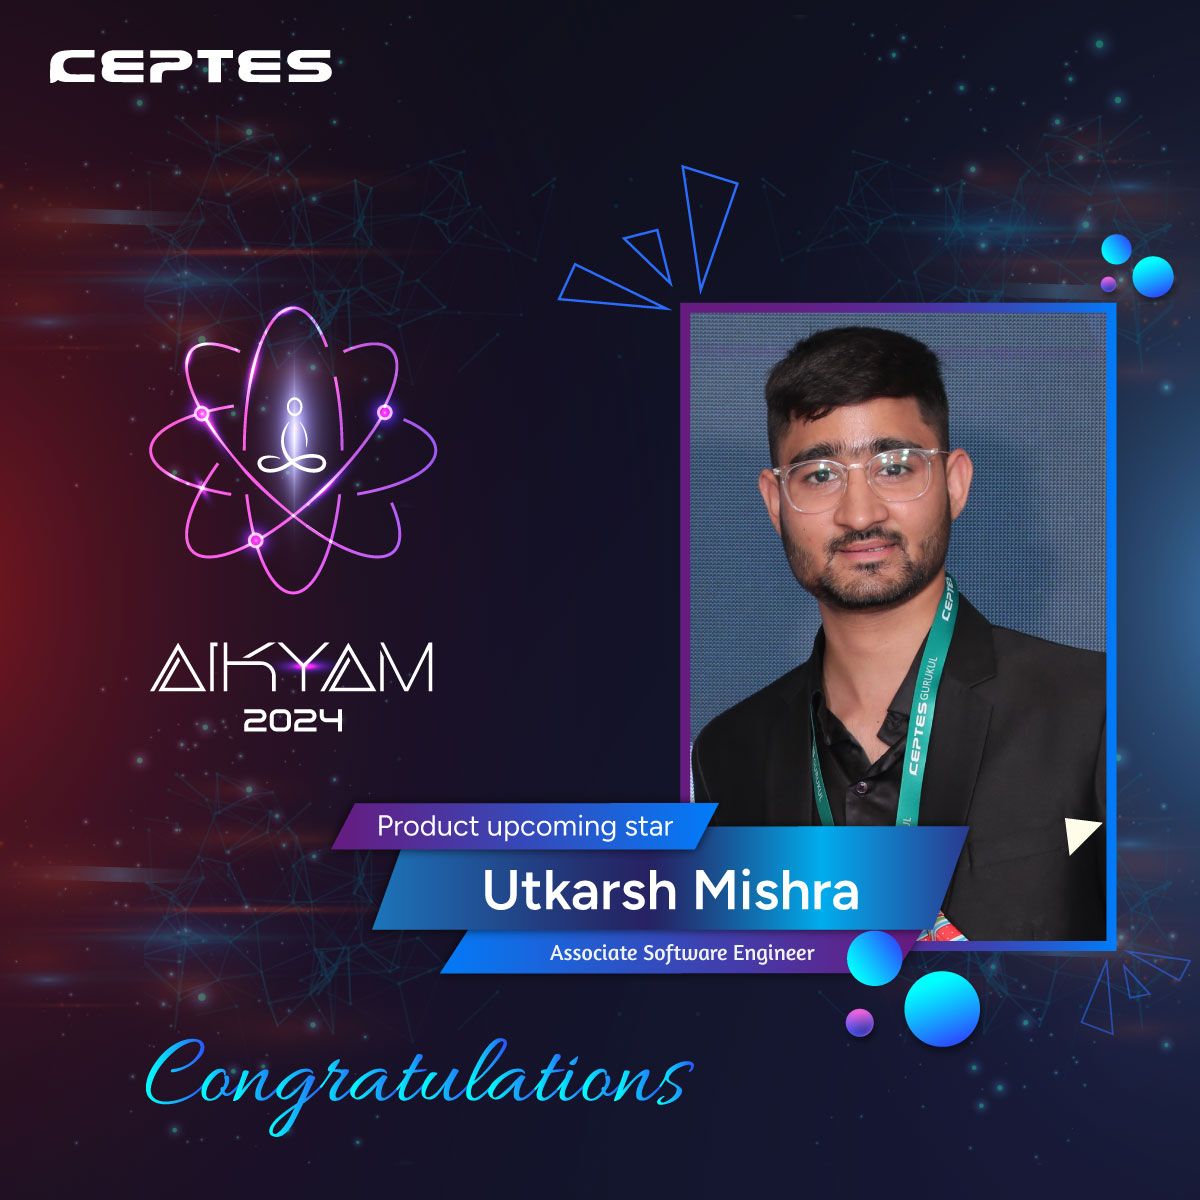 Utkarsh Mishra has swiftly demonstrated his exceptional abilities in the tech arena since joining our team. 

#AIKYAM2024 #TechGenius #ProductVirtuoso #InnovationChampion #RisingStar #FutureOfTech #TechAwards #ShiningBright #IngeniousMinds #CelebratingExcellence #TechInnovation